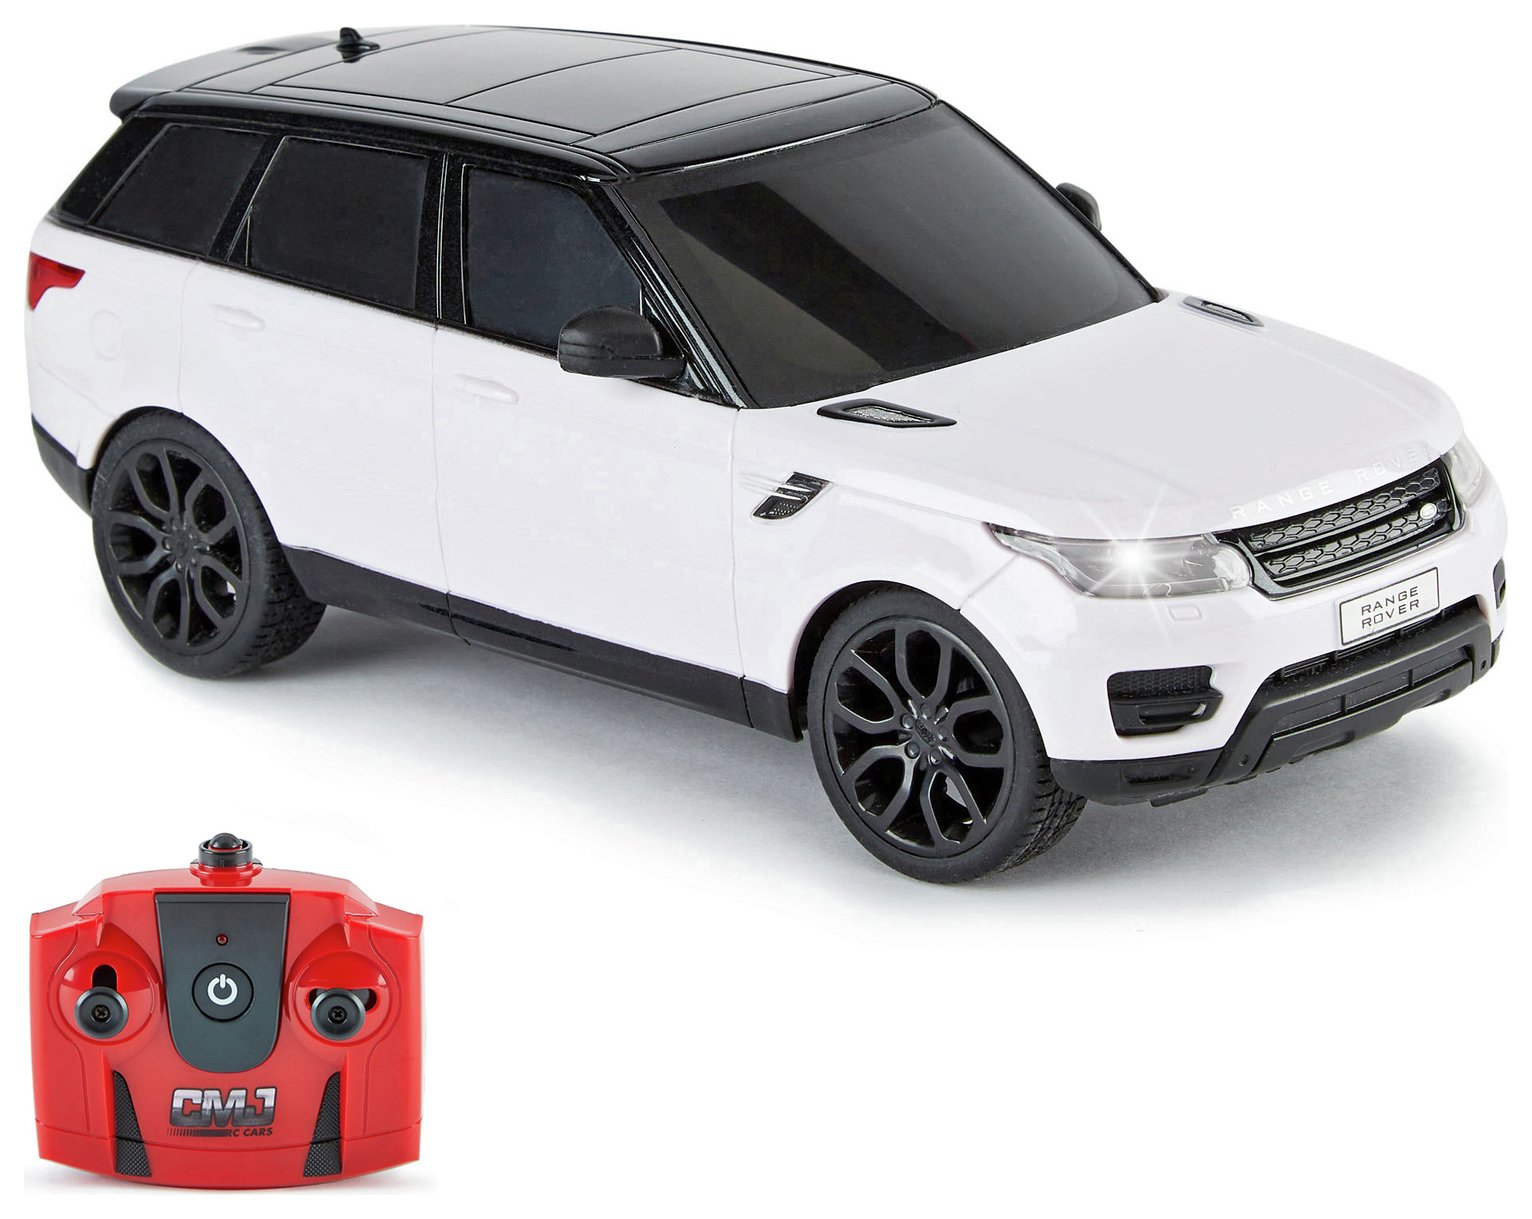 Range Rover 1:24 Radio Controlled Sports Car review